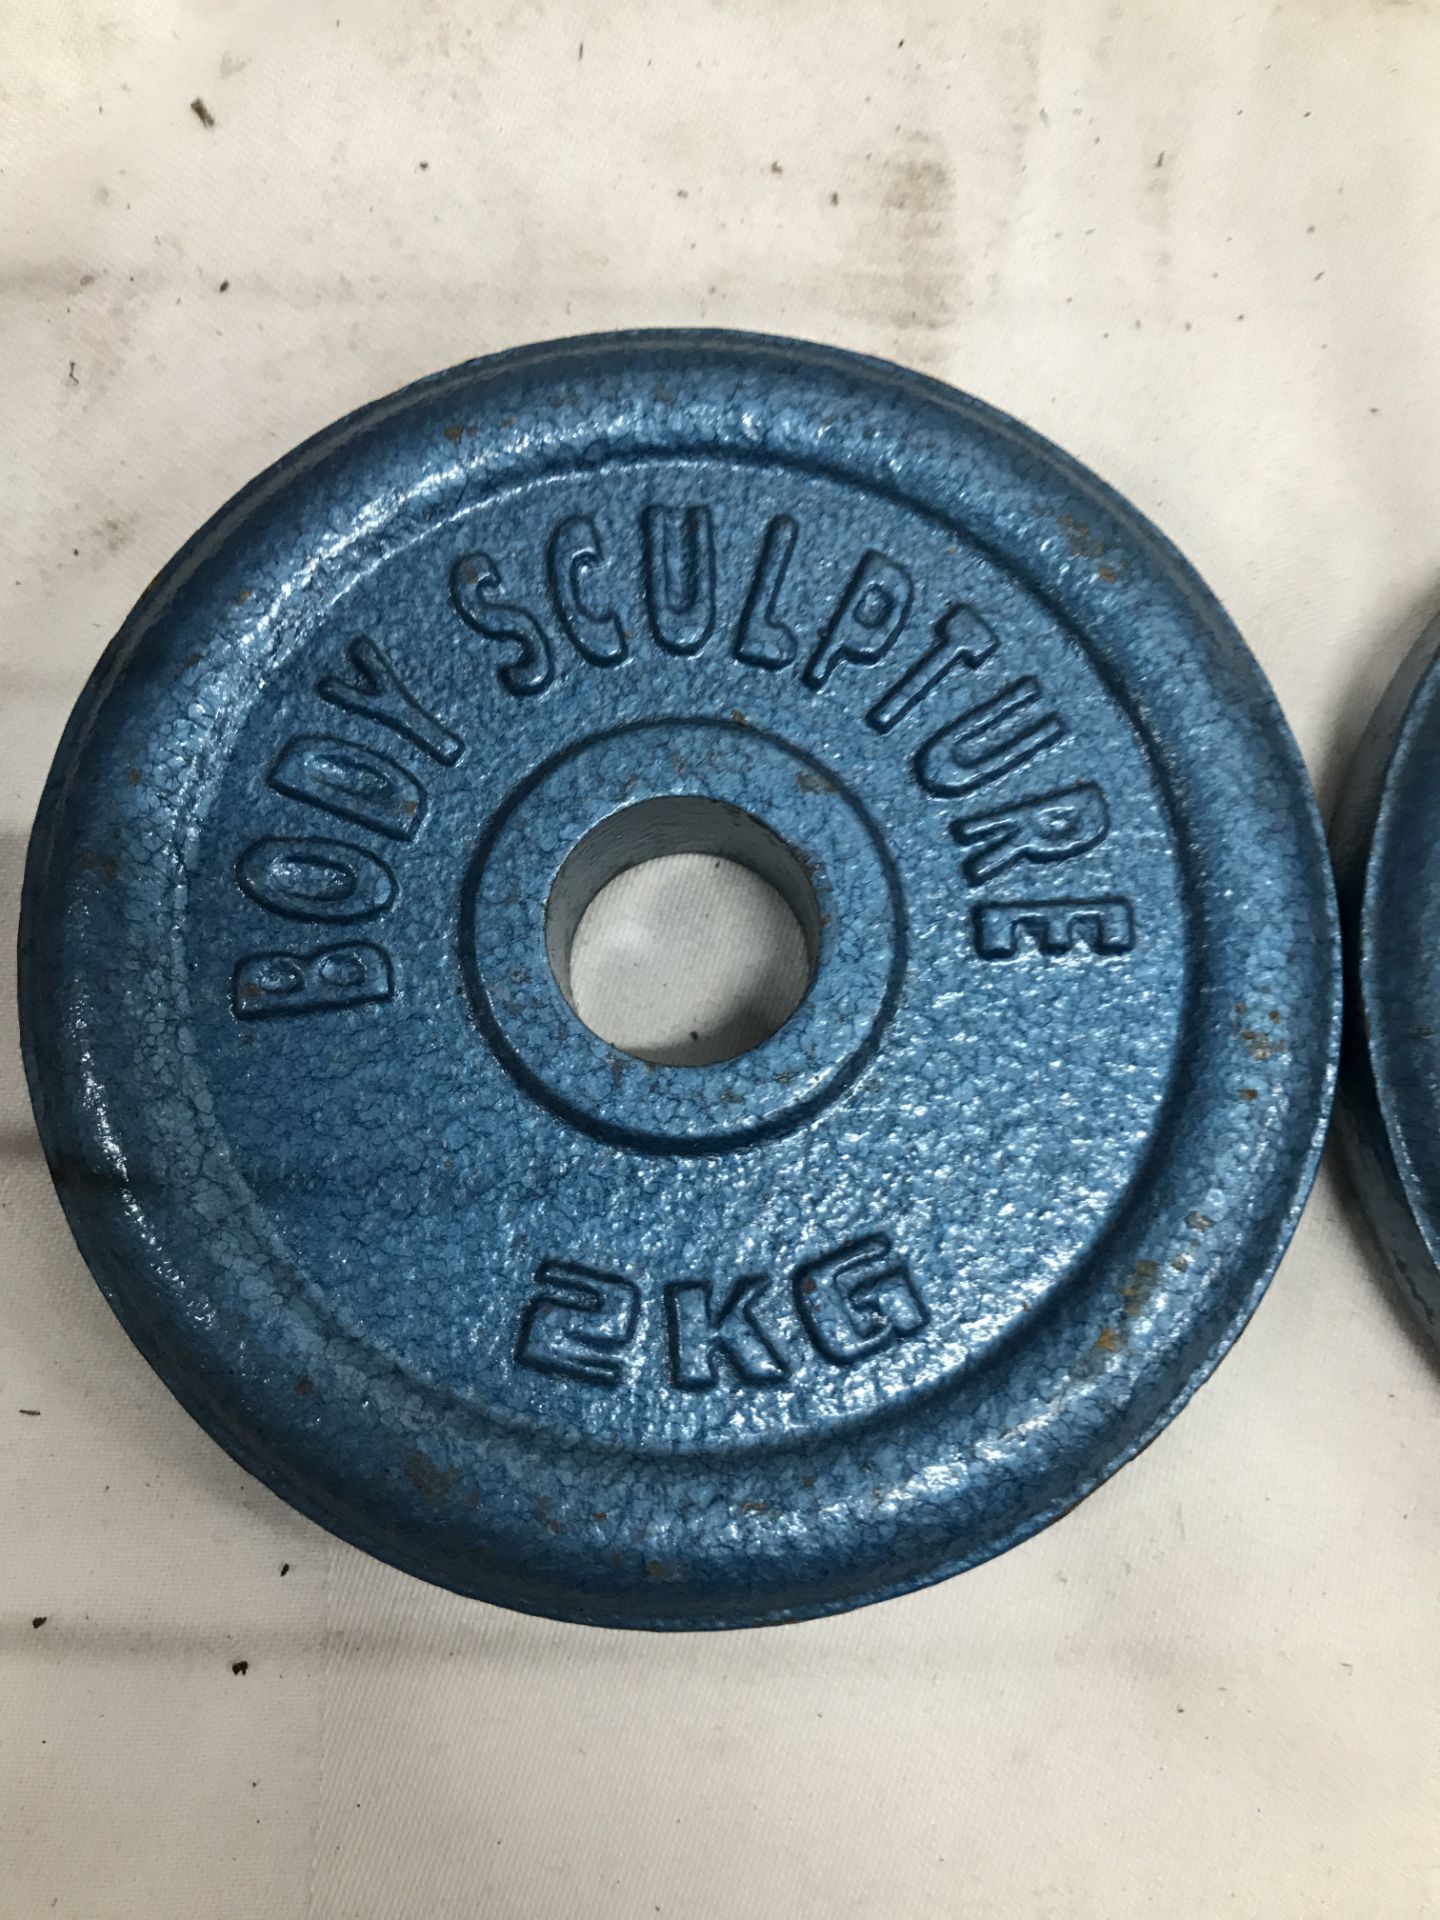 22 x Body Sculpture Weights - Image 2 of 5